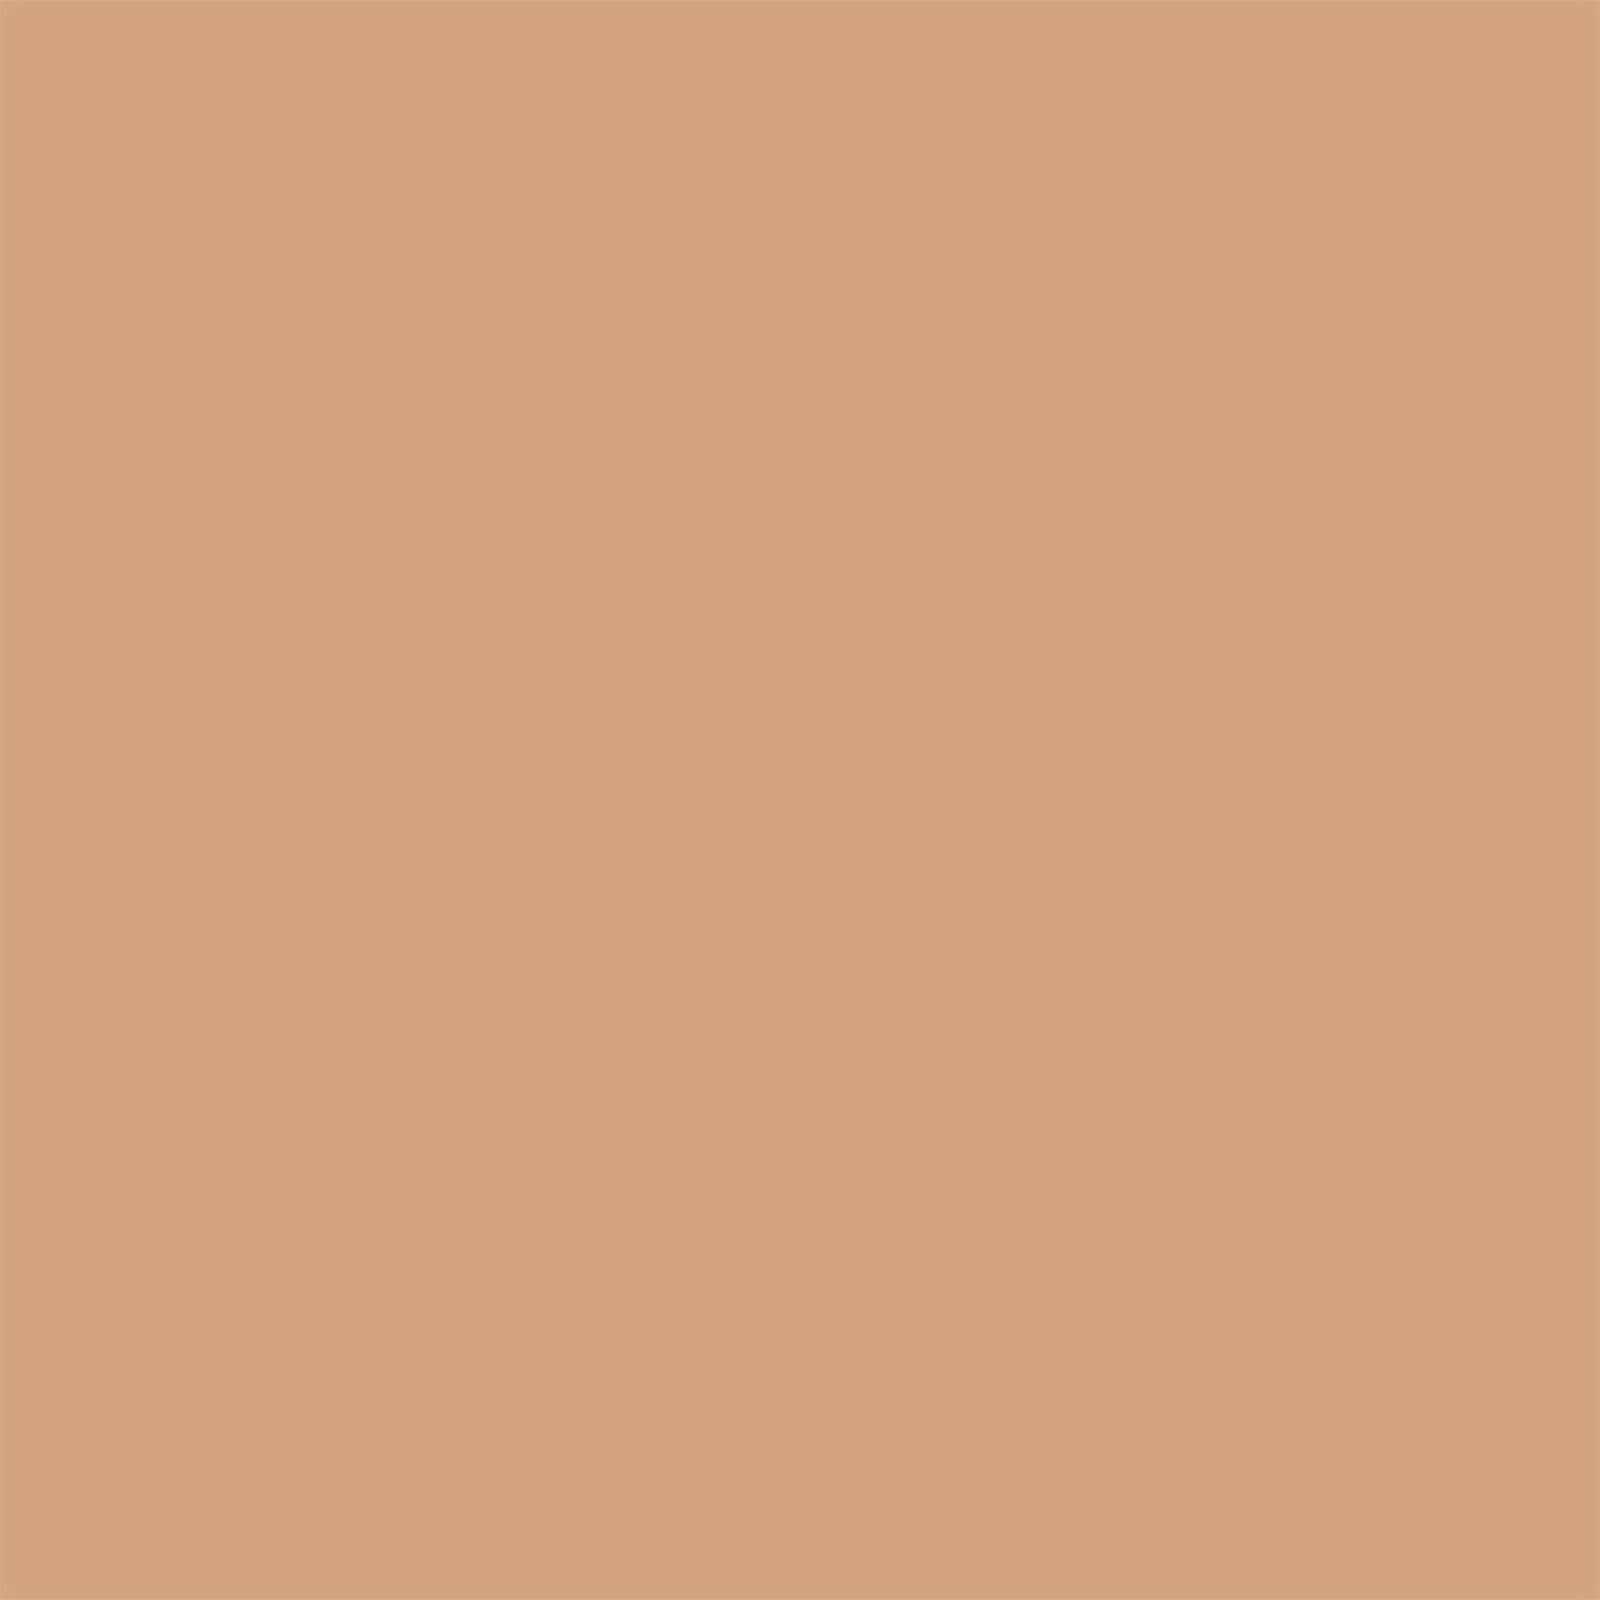 Kevyn Aucoin Stripped Nude Skin Tint (Various Shades) - Light ST 03